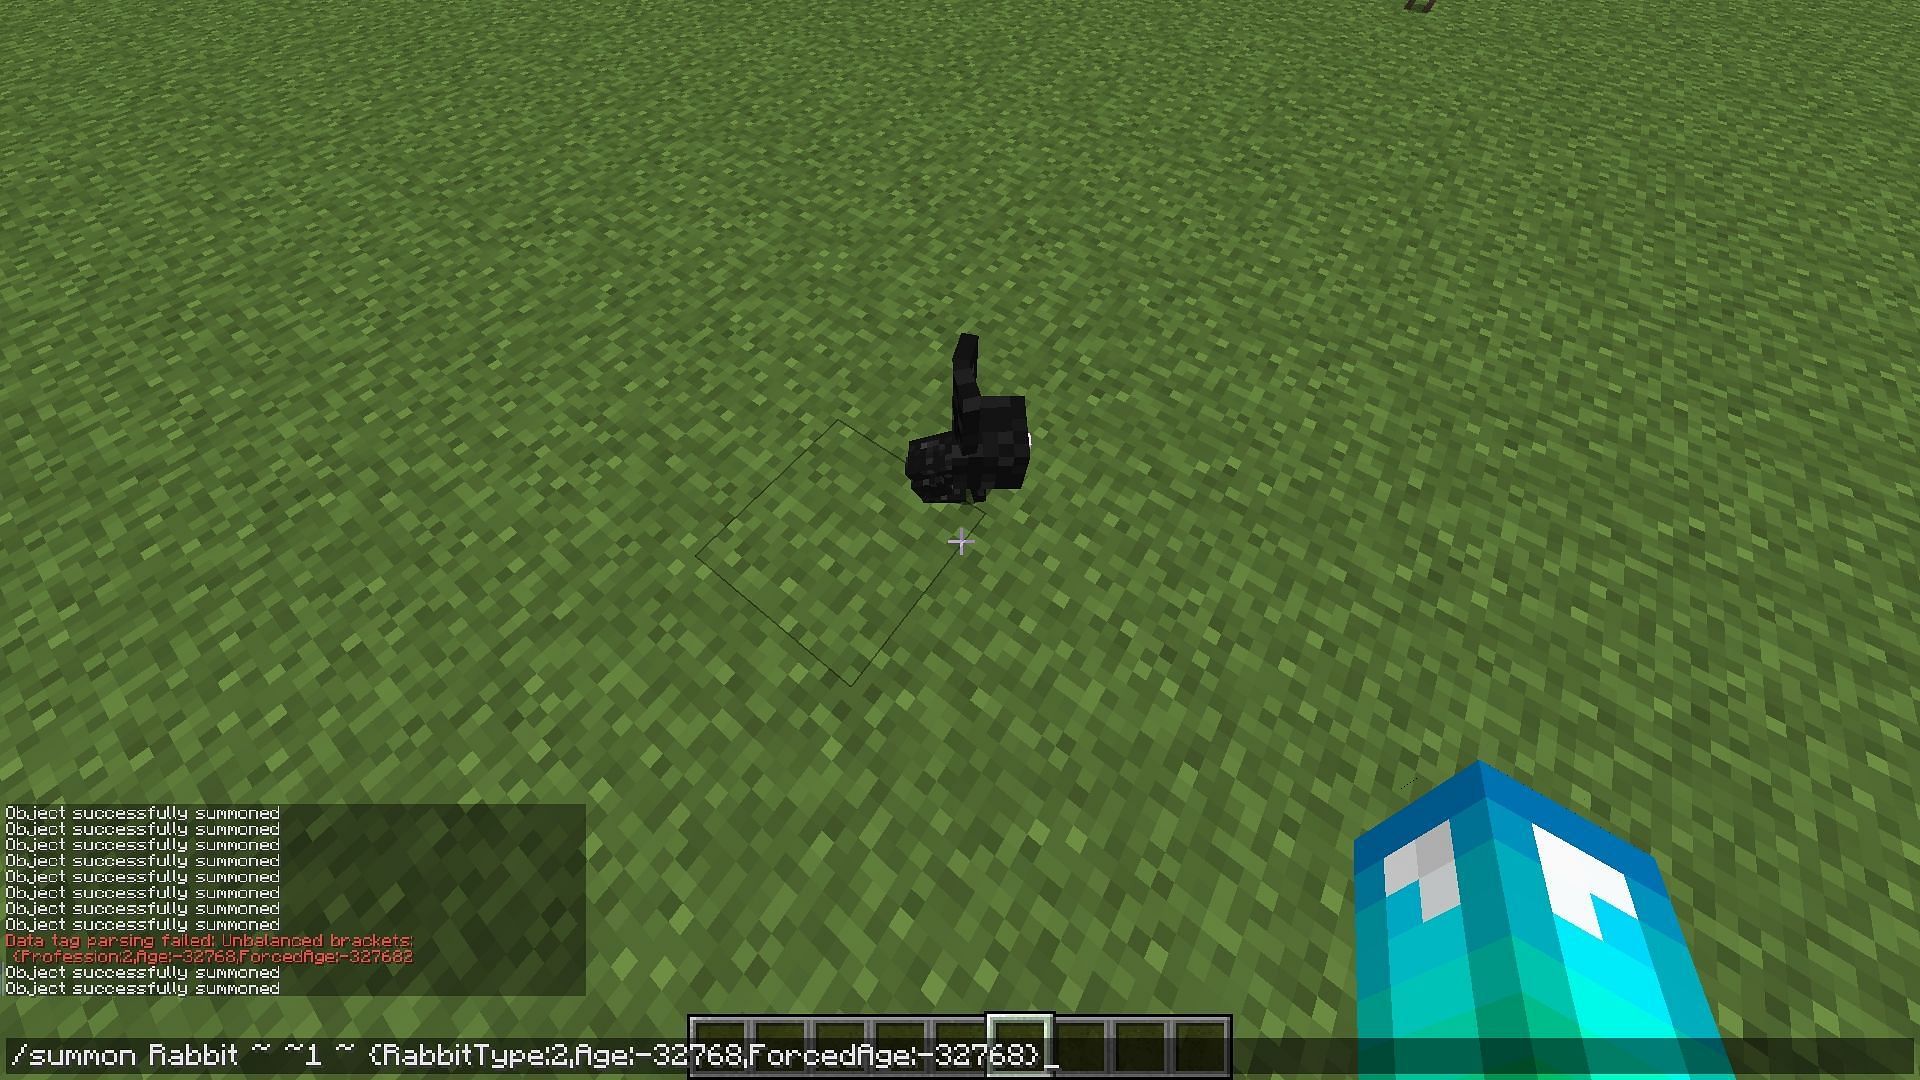 Baby rabbits are quite small in the game as well (Image via Minecraft Forums)